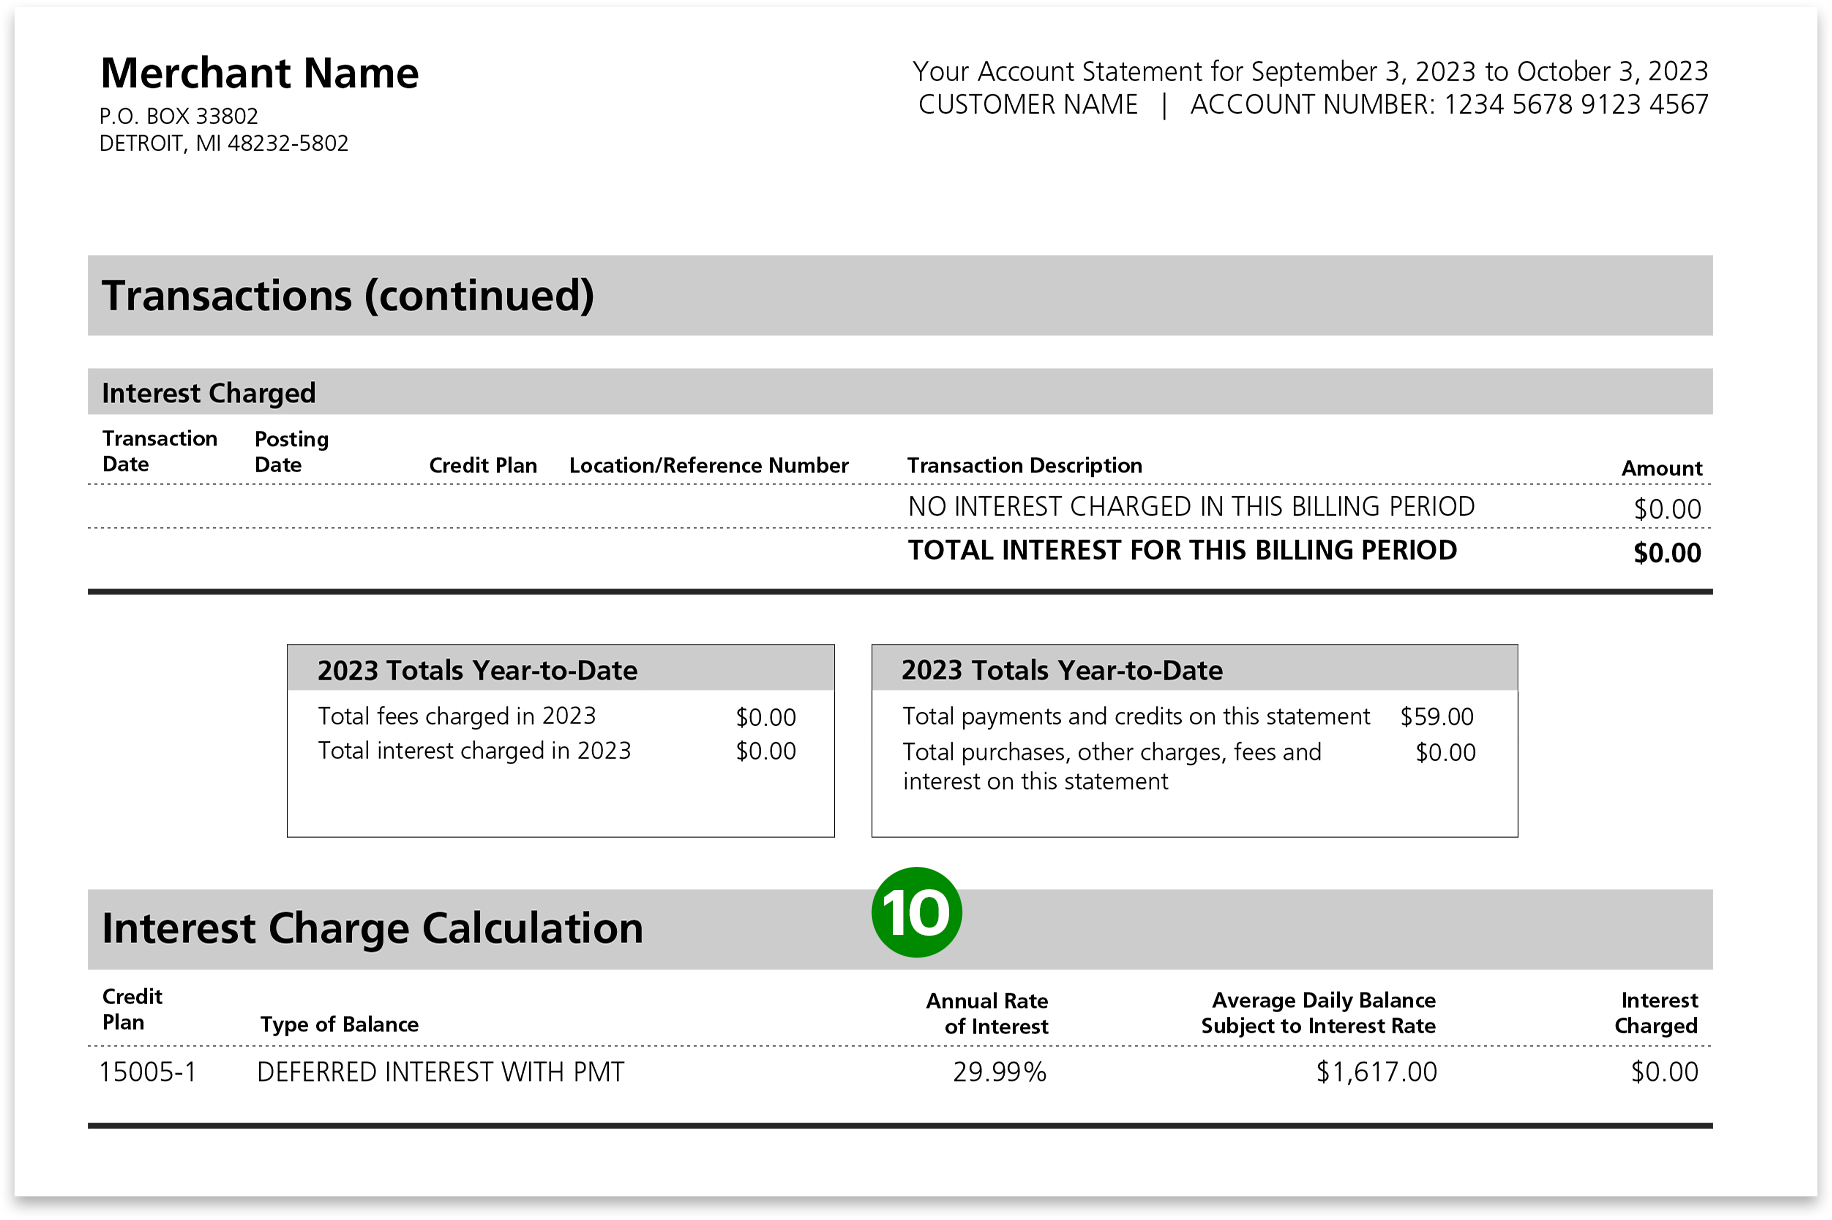 Image showing second half of typical credit statement